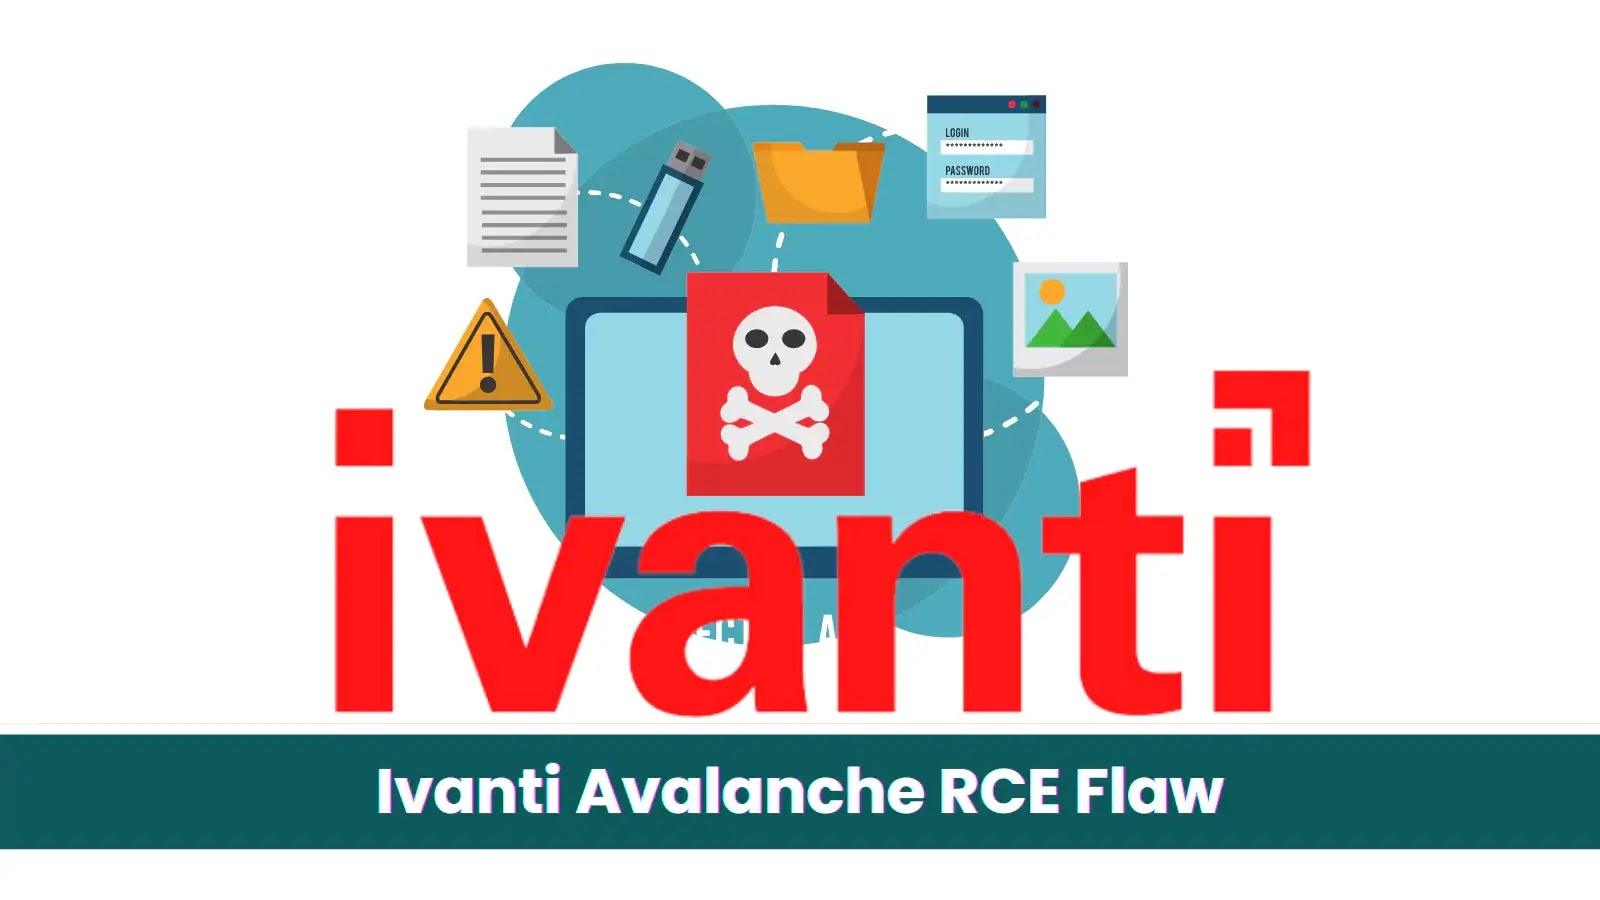 Ivanti Avalanche Vulnerabilities Let Attackers Remotely Exploit Without User Authentication